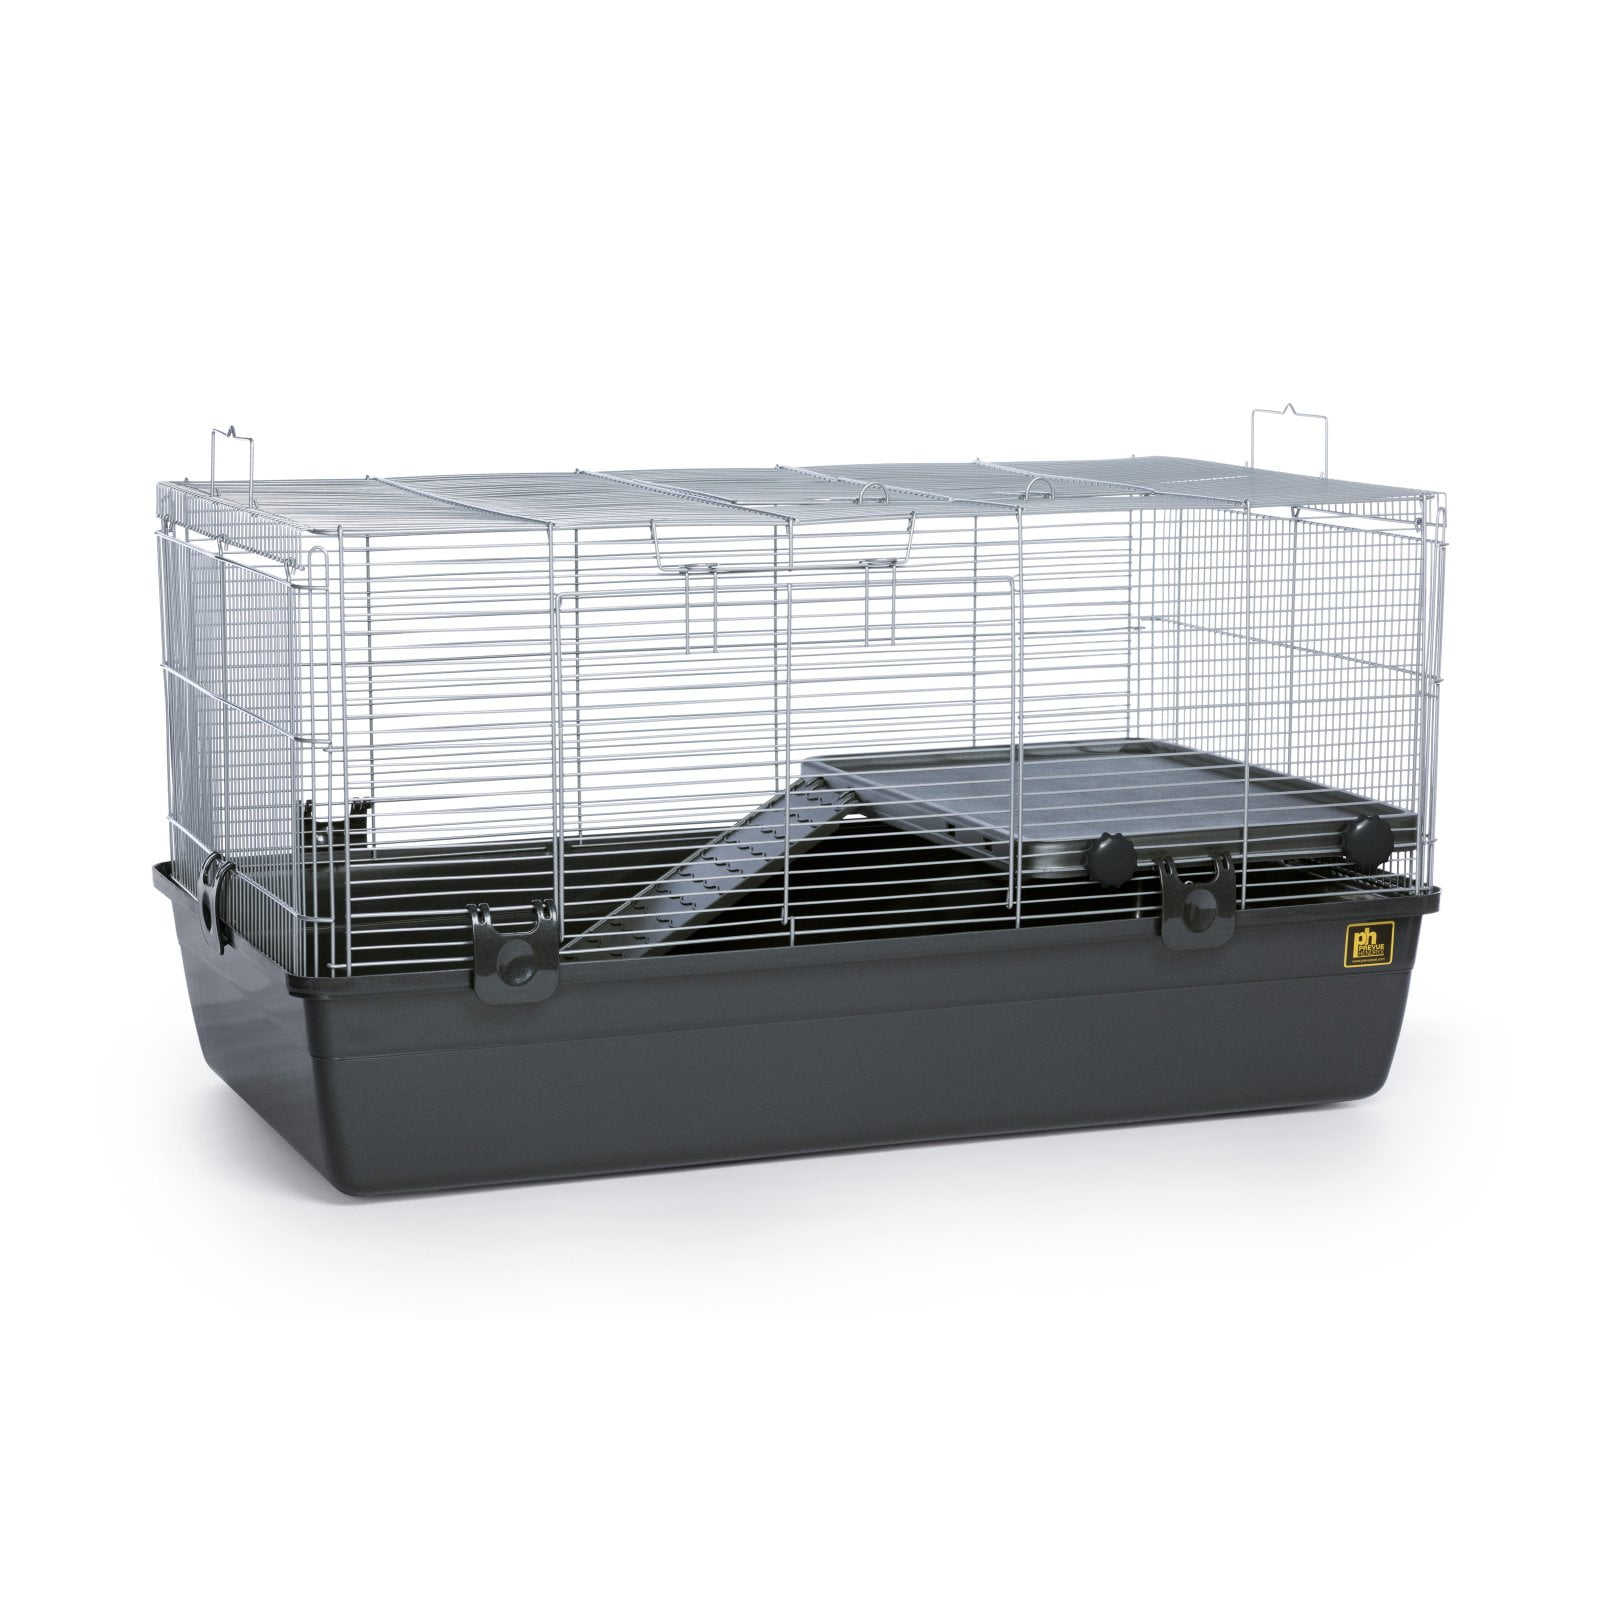 Picture of Prevue Pet Products 048081005286 Small Animal Home Universal Cage, Dark Gray - 32.5 x 19 x 17.5 in.